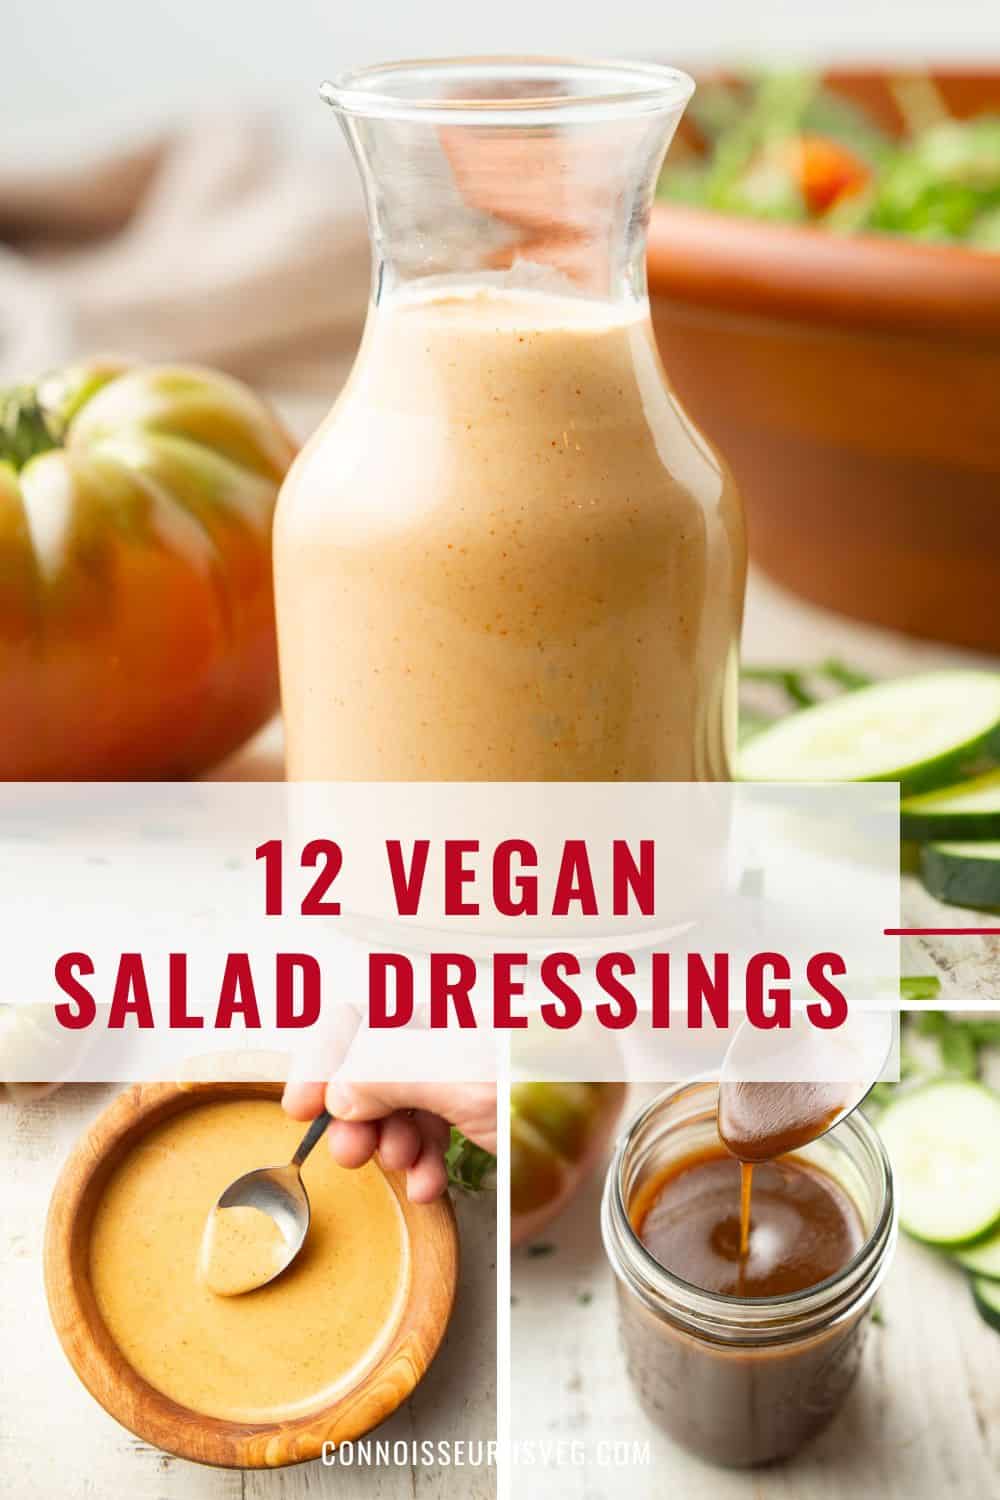 Graphic showing three photos of salad dressings with text overlay reading "12 vegan salad dressings".